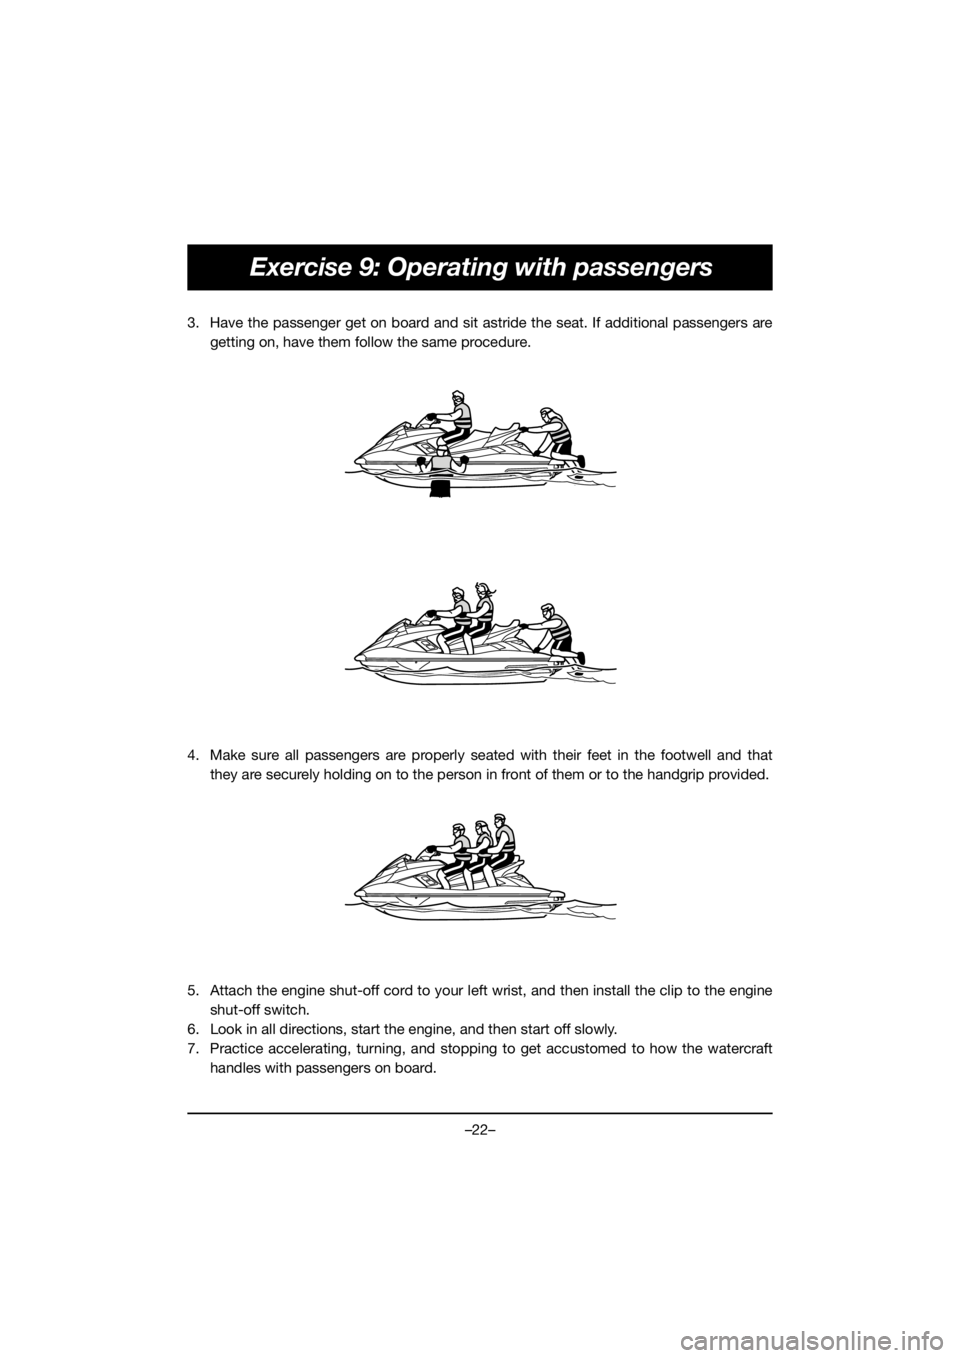 YAMAHA FX HO 2020  Betriebsanleitungen (in German) –22–
Exercise 9: Operating with passengers
3. Have the passenger get on board and sit astride the seat. If additional passengers are
getting on, have them follow the same procedure.
4. Make sure a